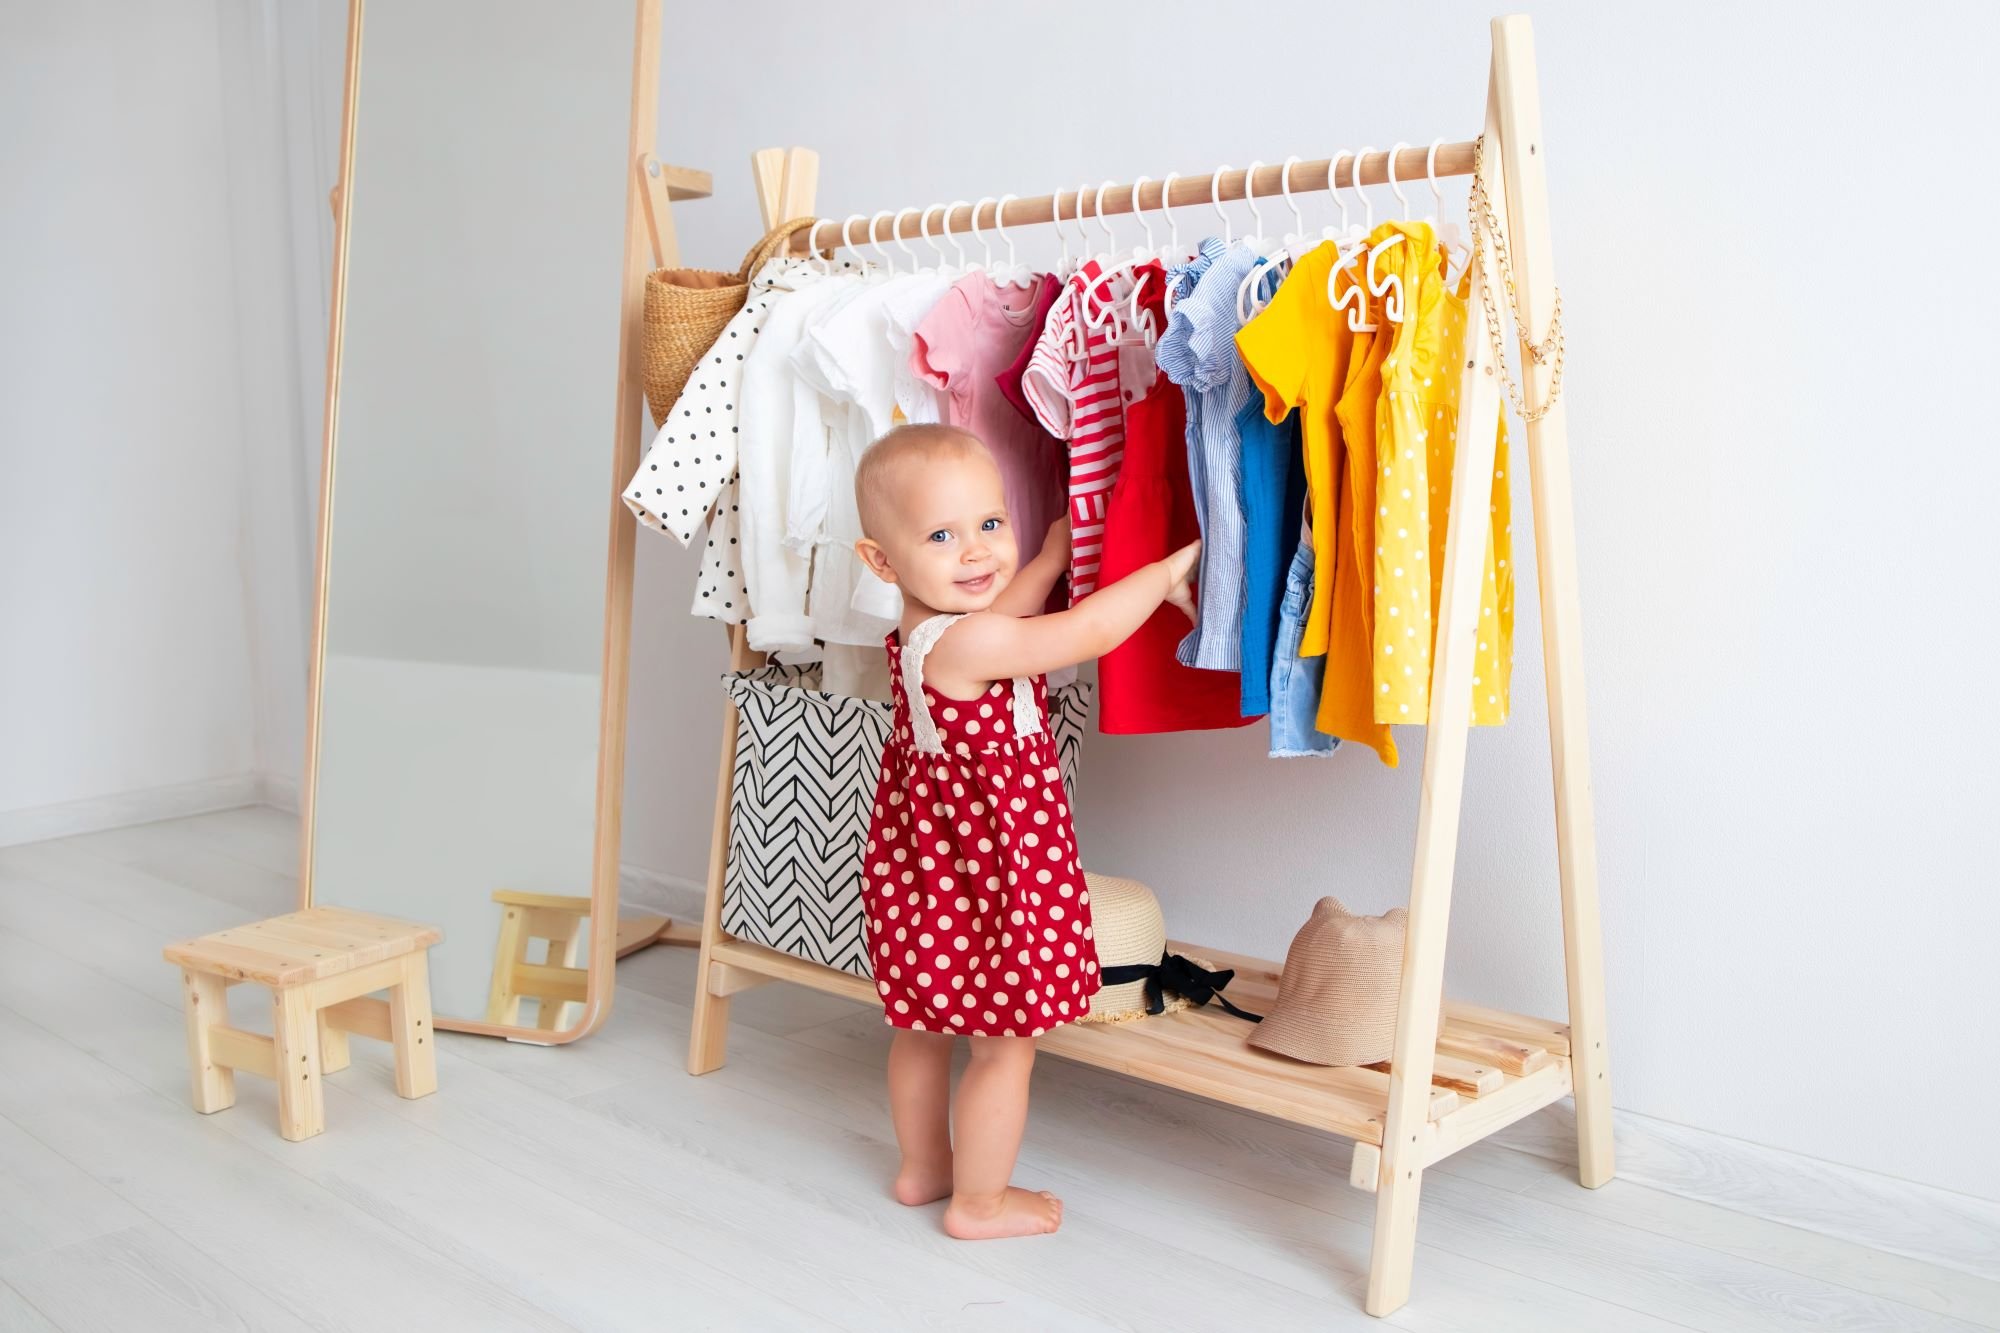 Dressing Your Kids